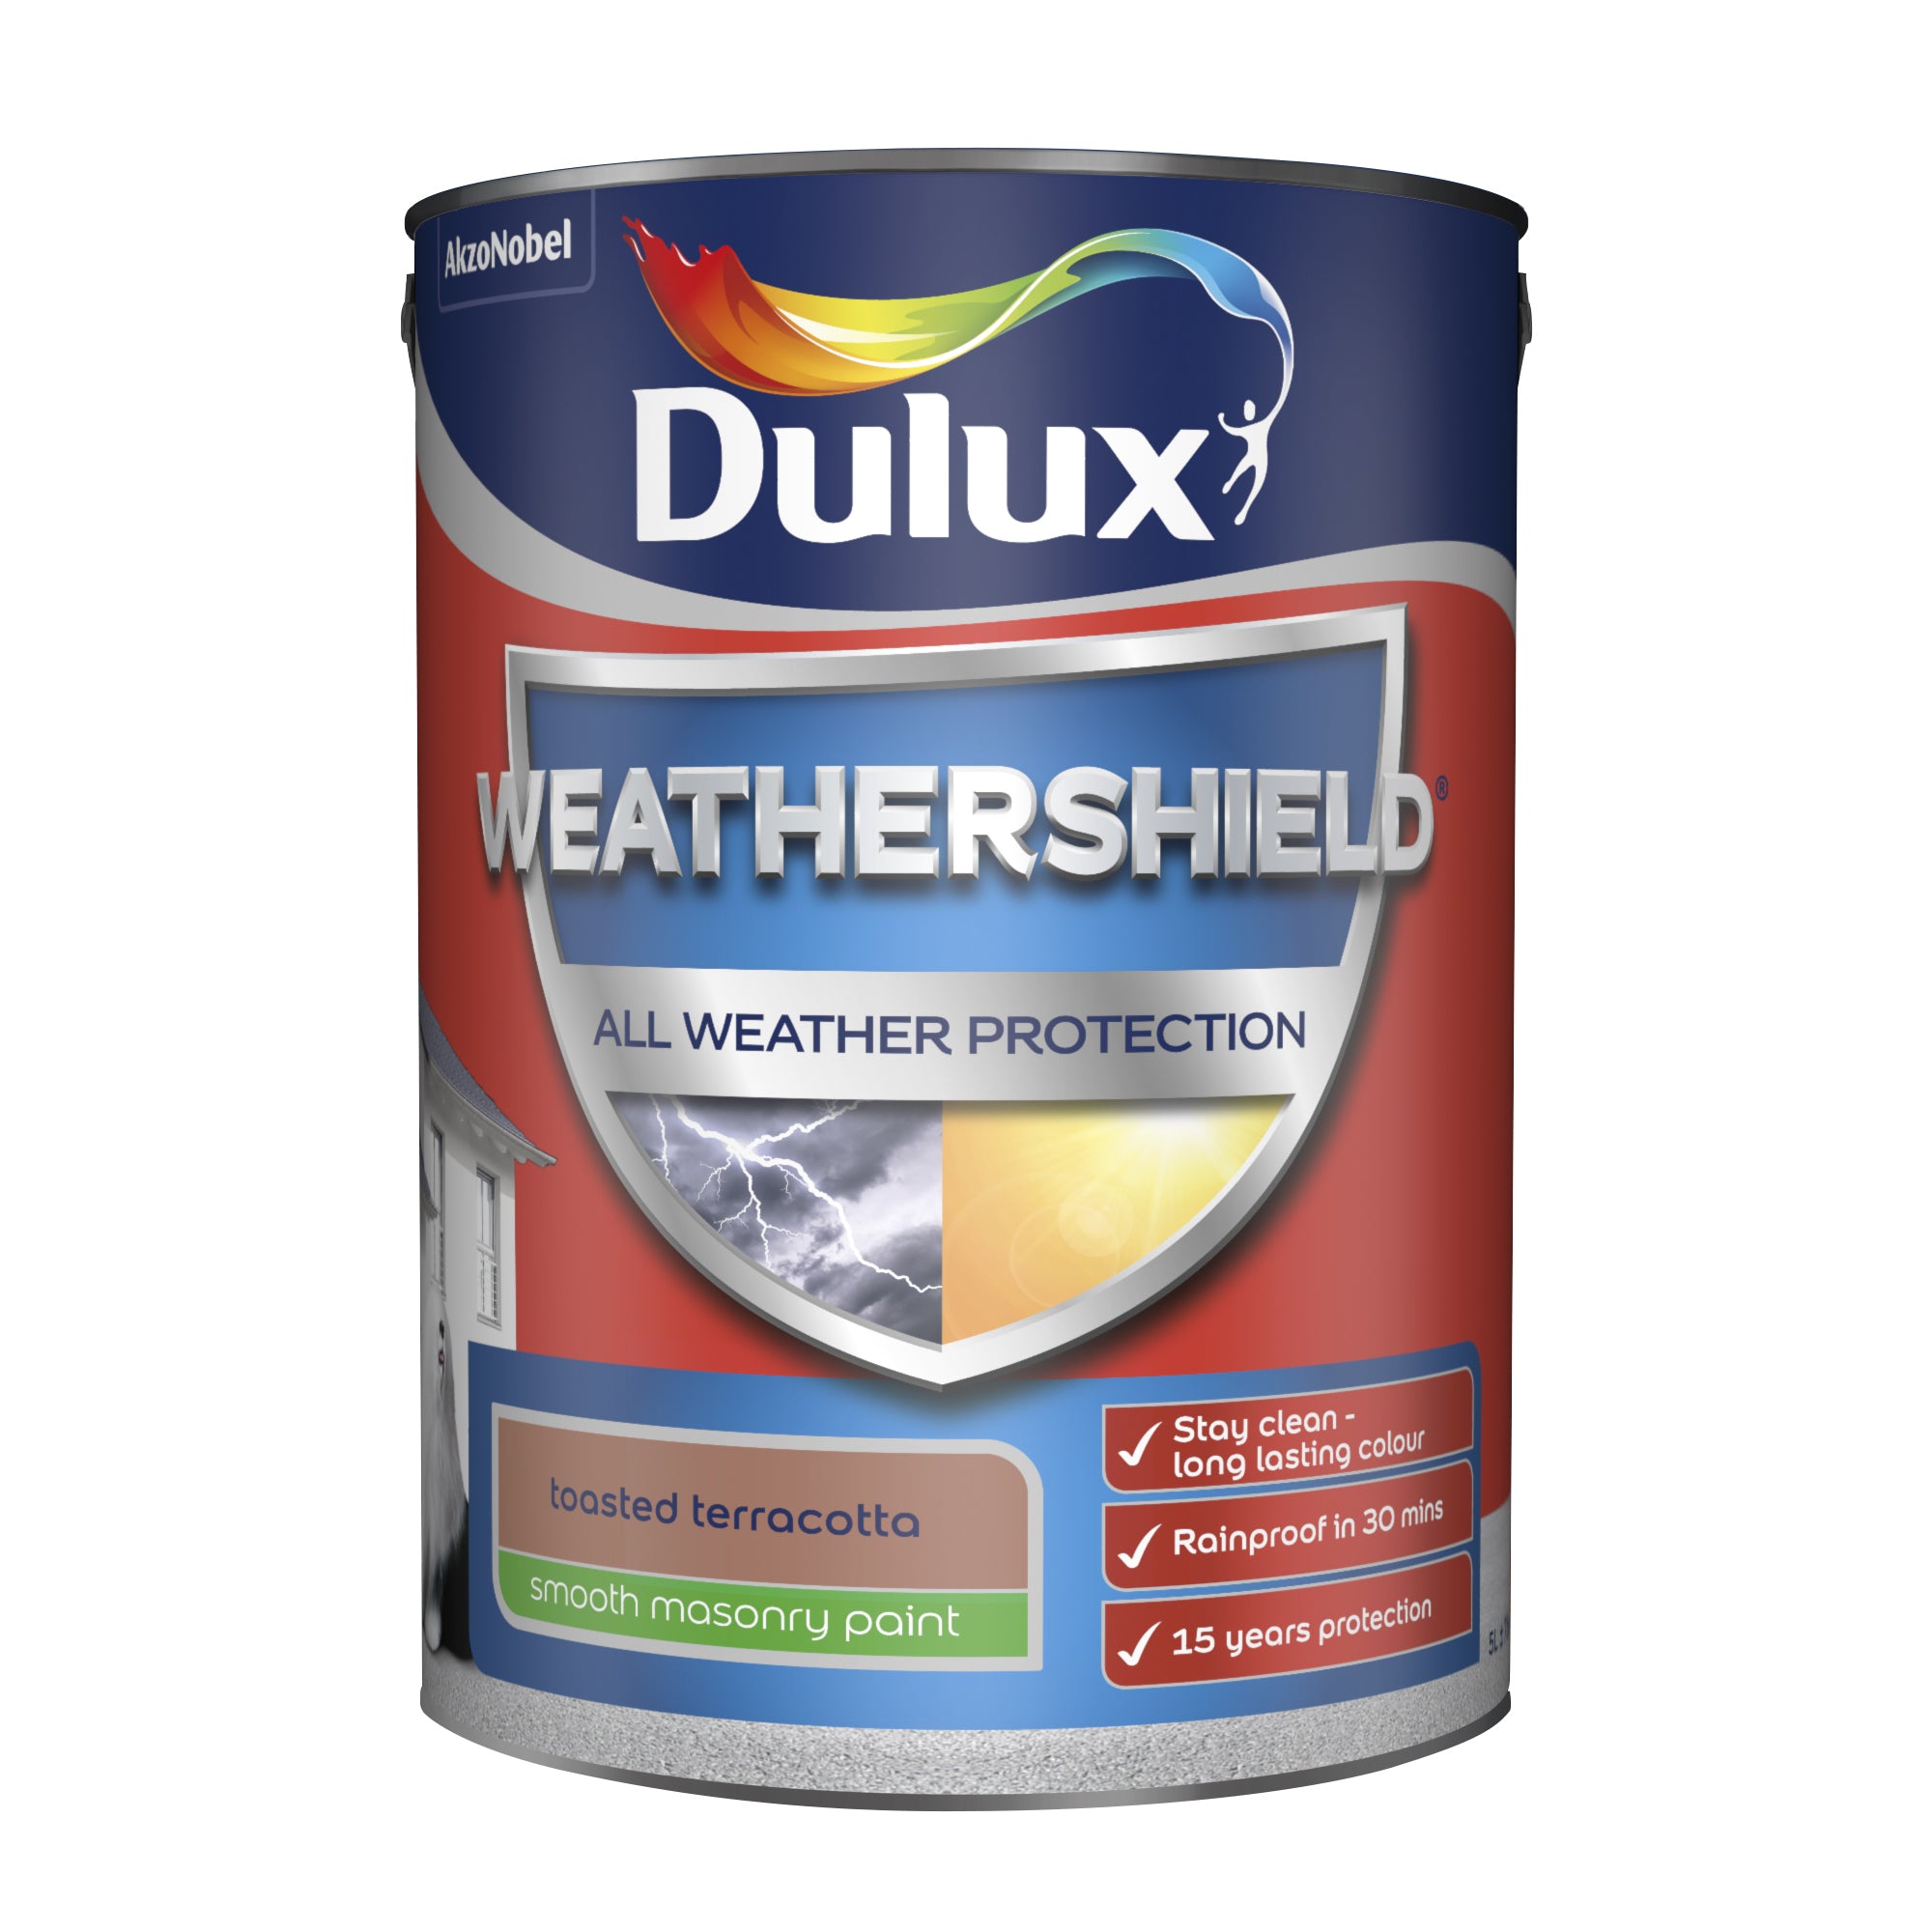 Dulux Weathershield All Weather Protection Smooth Toasted Terracotta 5L